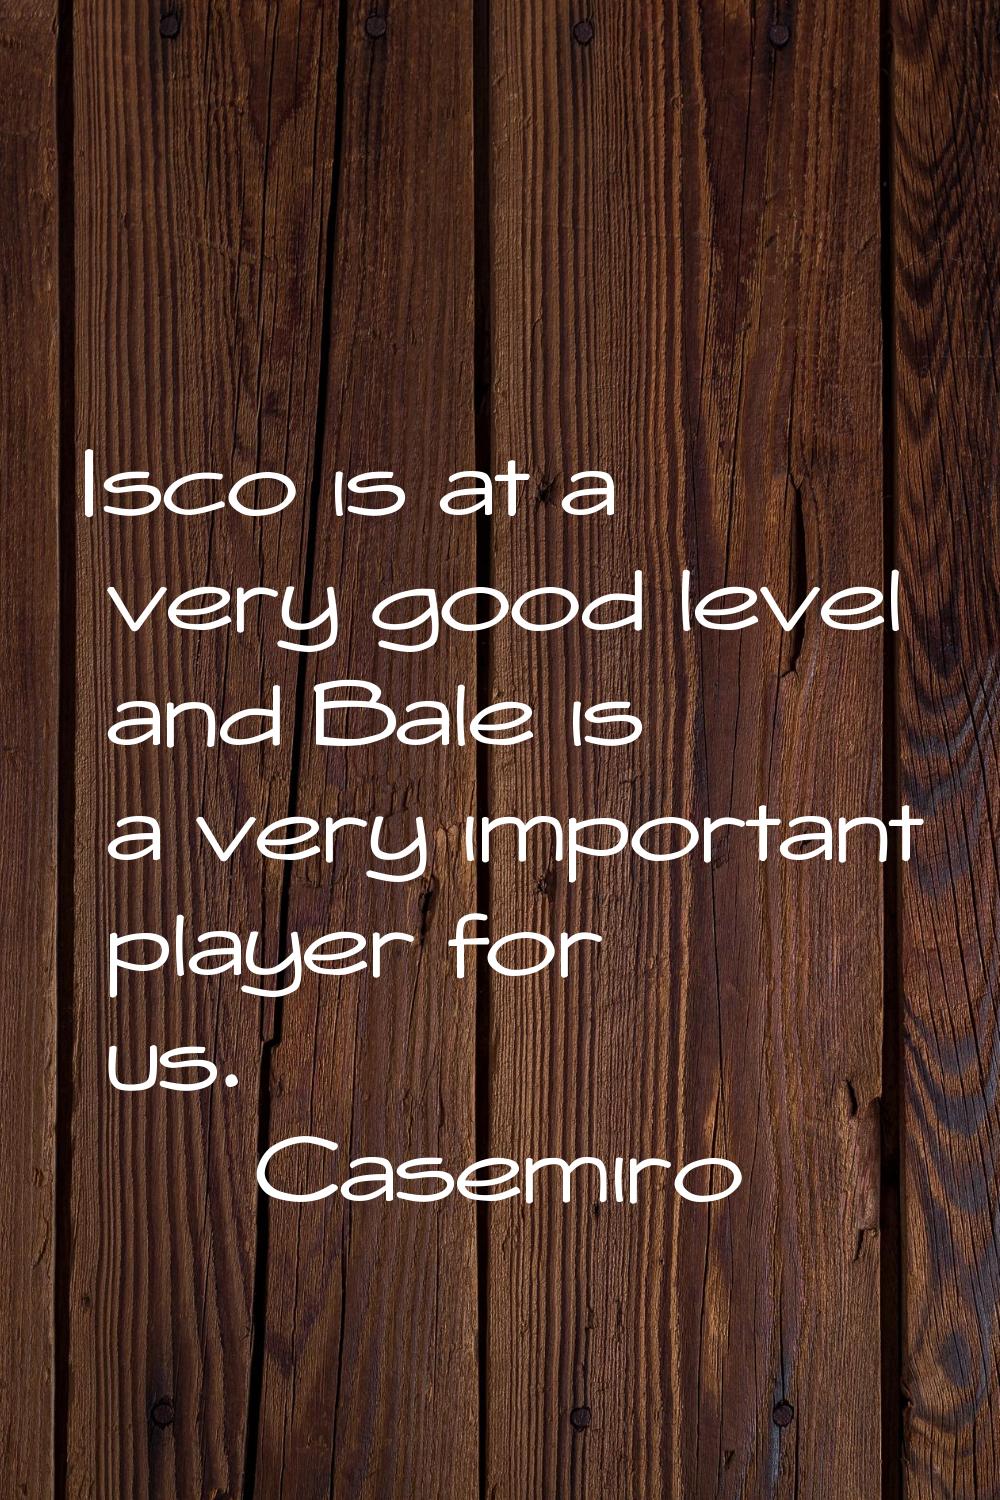 Isco is at a very good level and Bale is a very important player for us.